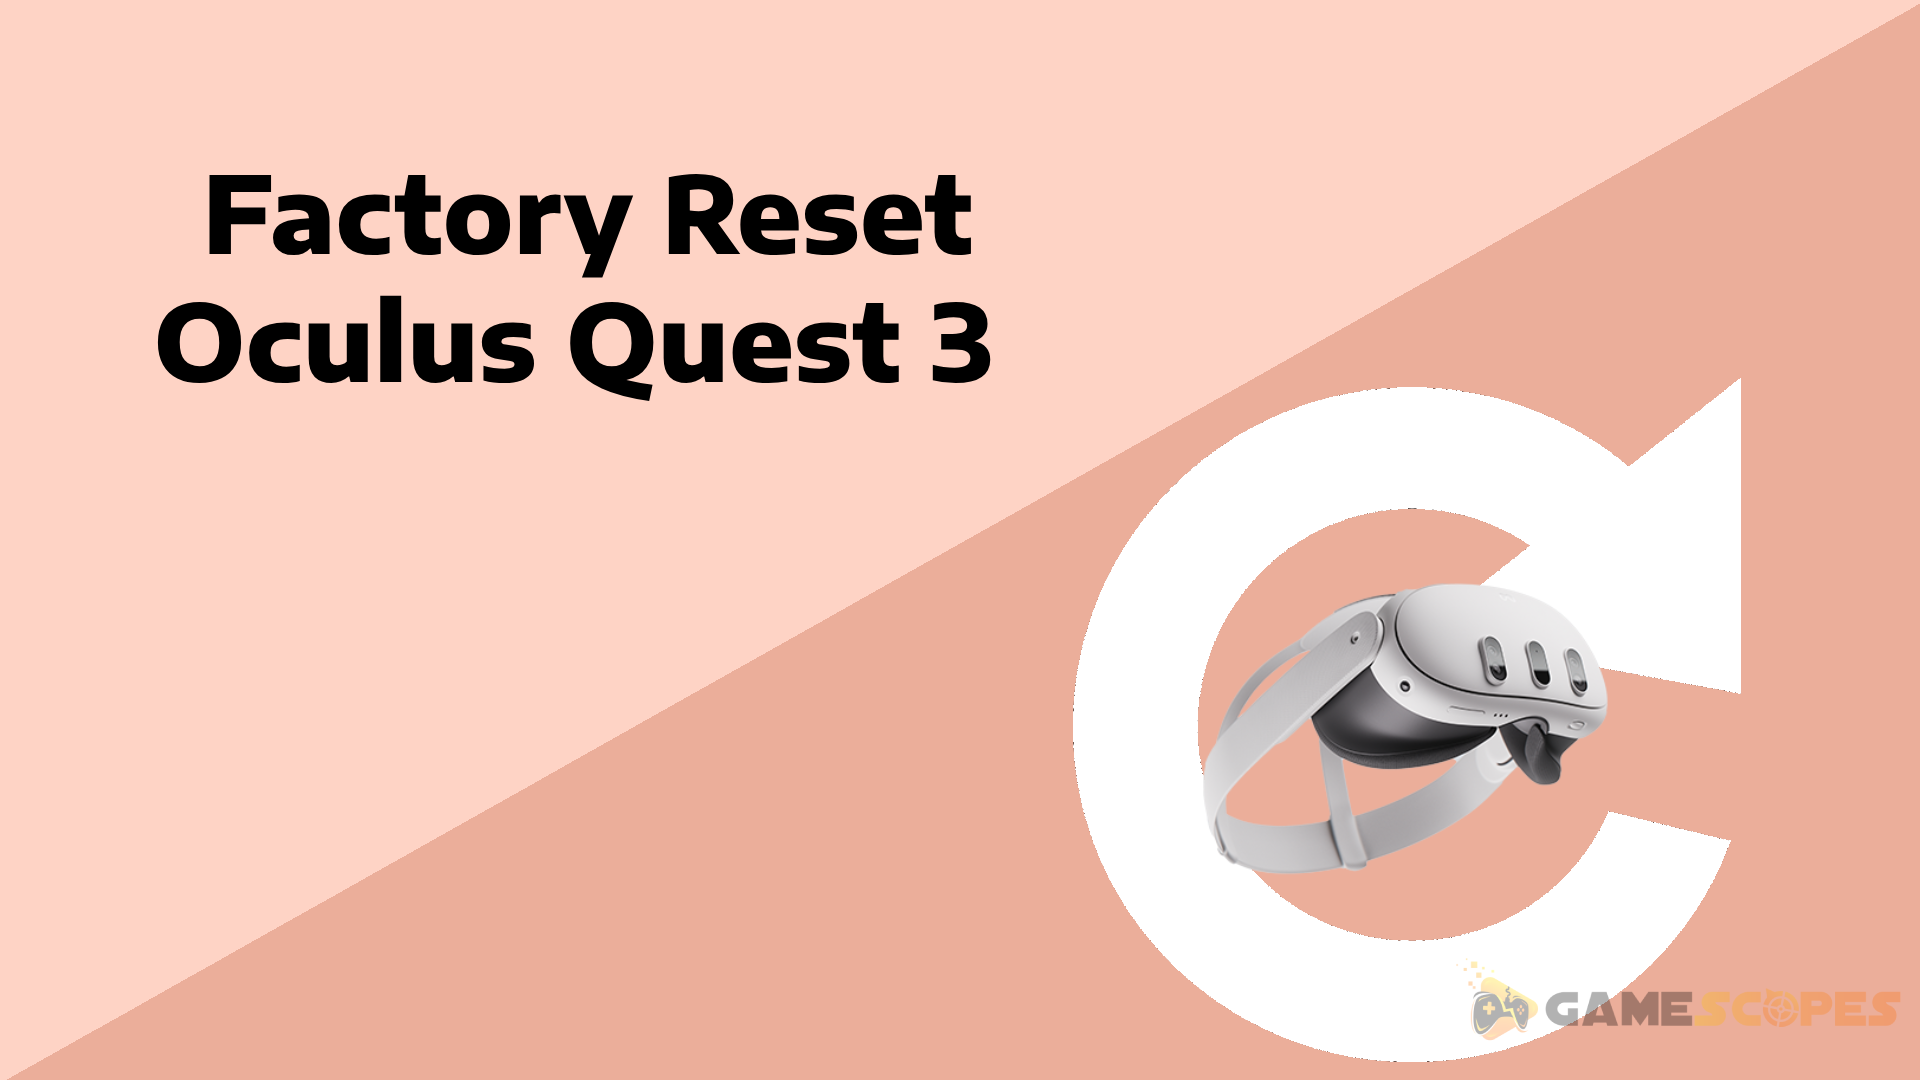 When Oculus Quest 3 Not Connecting to PC, factory reset the system.